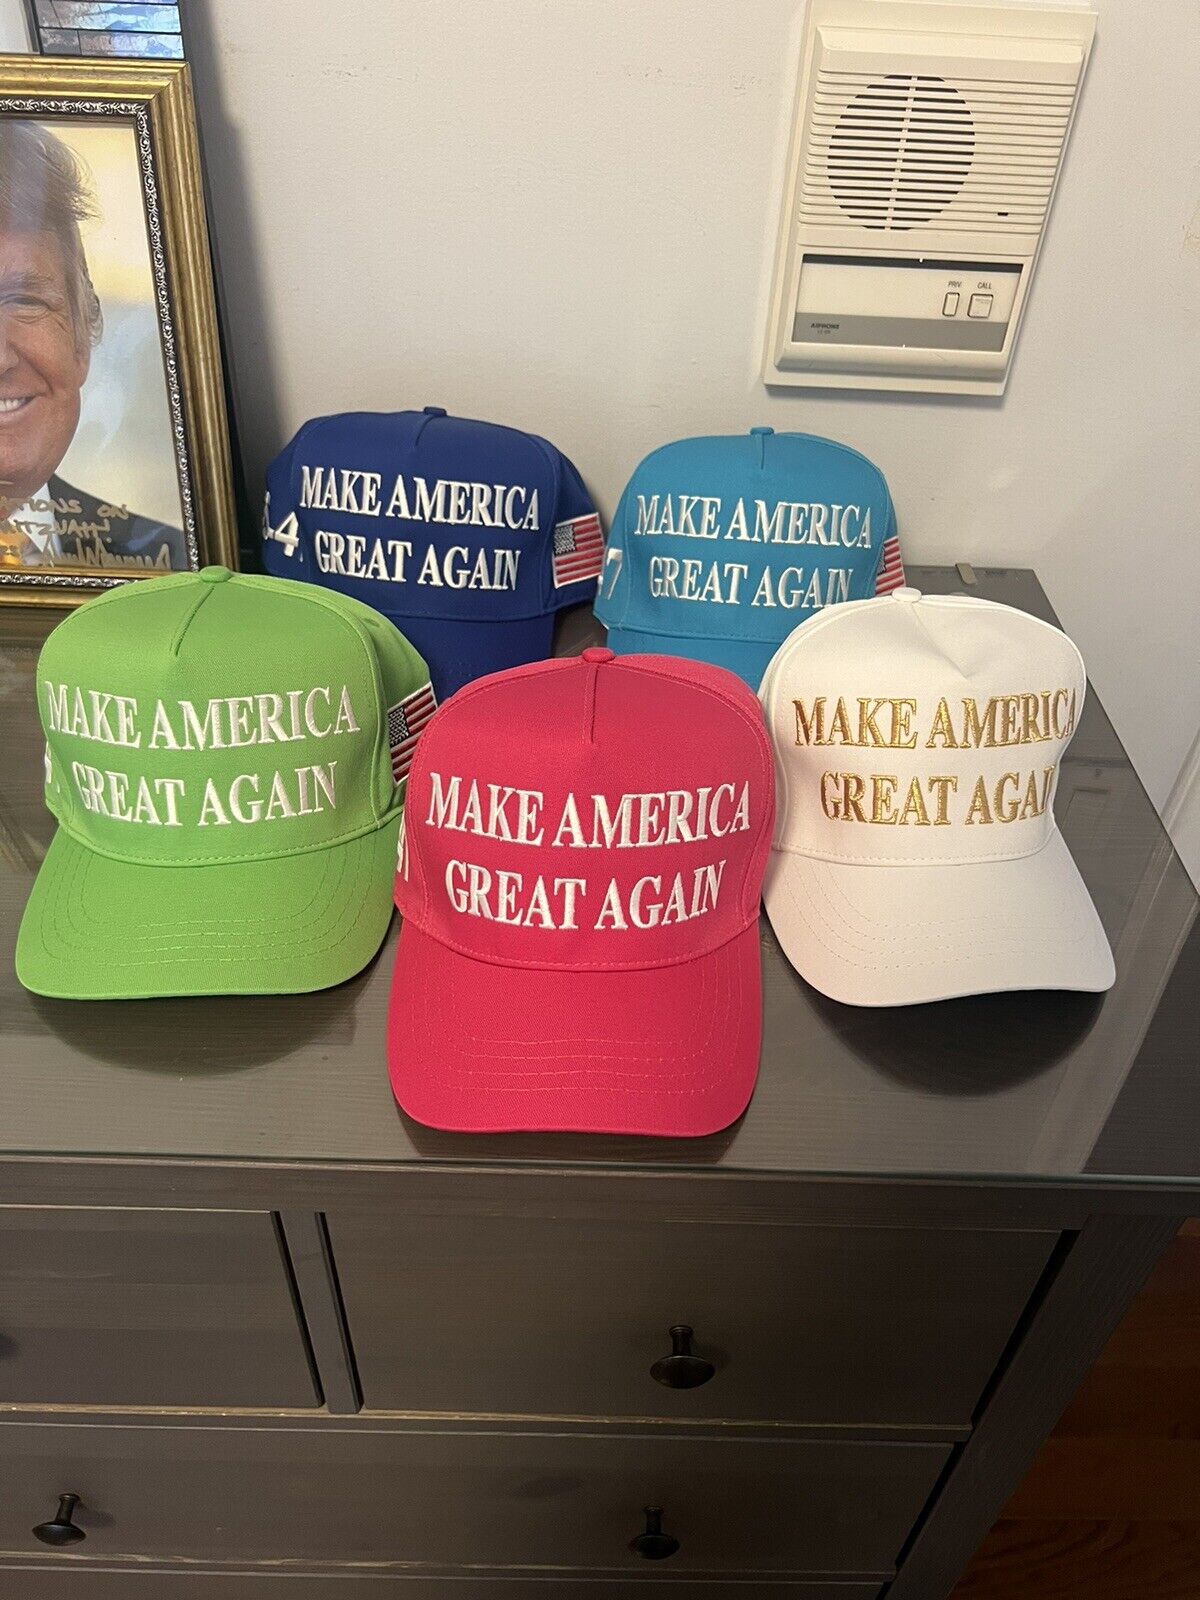 RARE MAGA LOT Cap 45-47 Authentic official Trump 2024 campaign gear CaliFame Hat